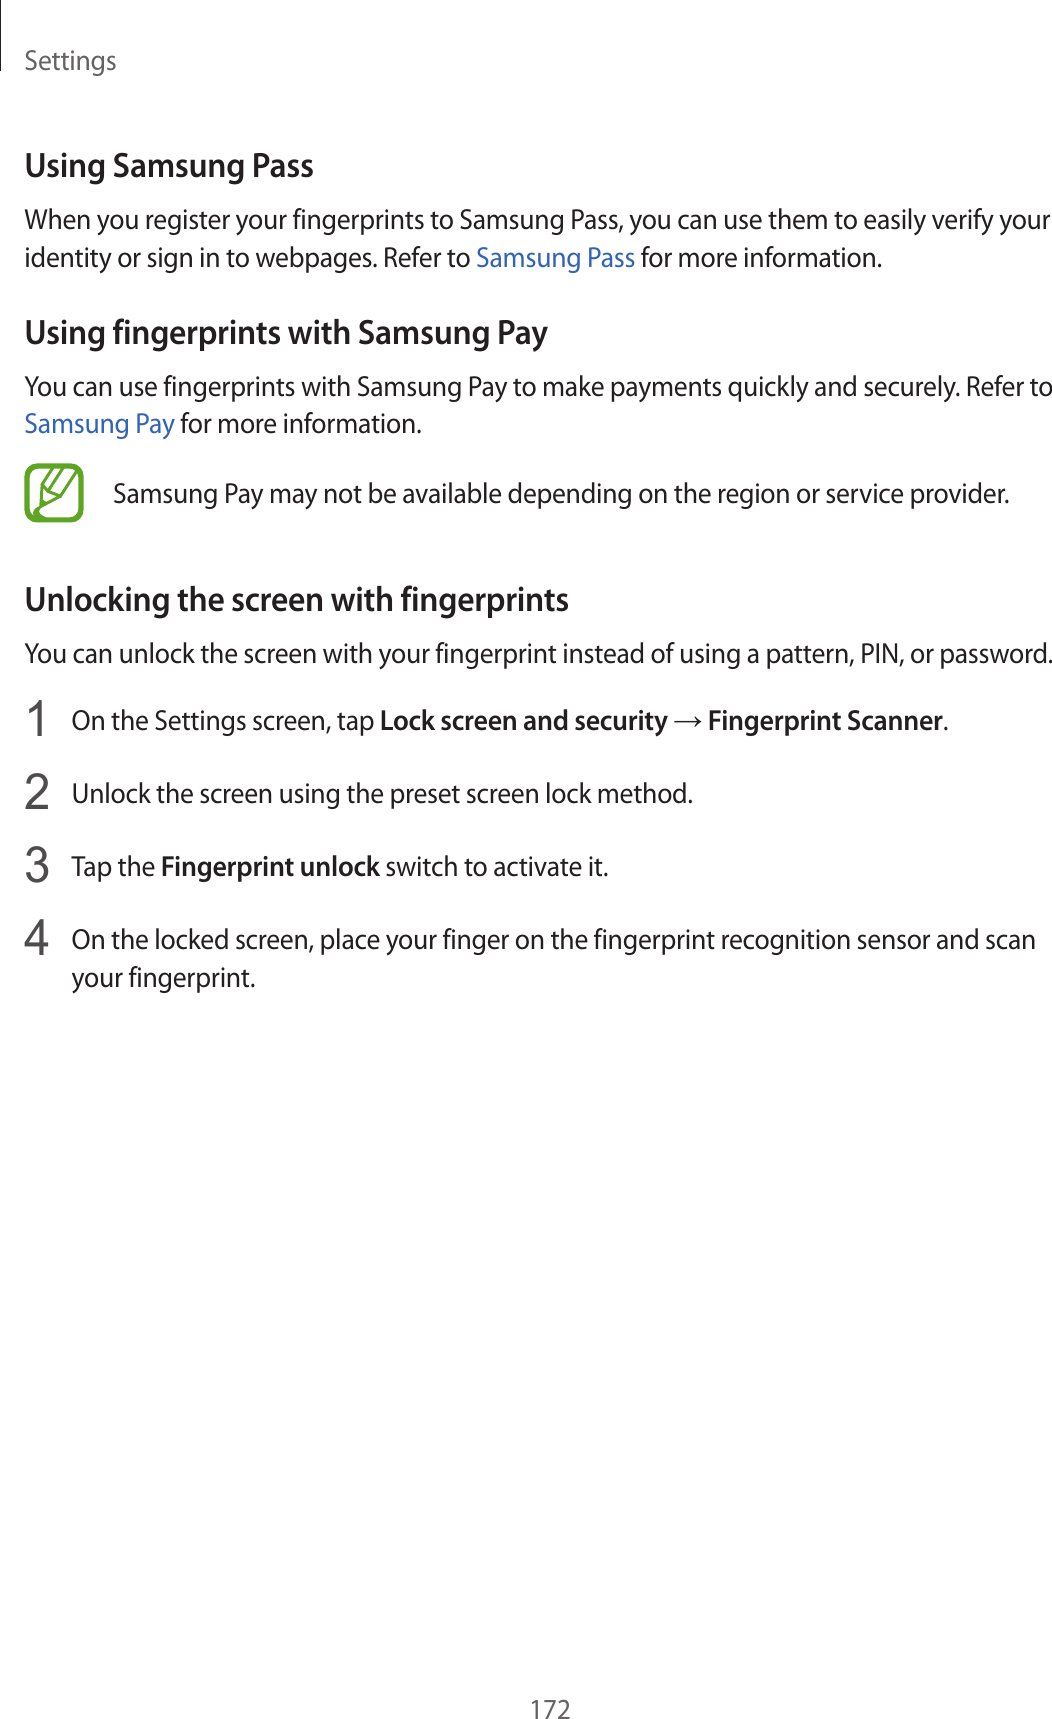 Settings172Using Samsung PassWhen you register your fingerprints to Samsung Pass, you can use them to easily verify your identity or sign in to webpages. Refer to Samsung Pass for more information.Using fingerprints with Samsung PayYou can use fingerprints with Samsung Pay to make payments quickly and securely. Refer to Samsung Pay for more information.Samsung Pay may not be available depending on the region or service provider.Unlocking the screen with fingerprintsYou can unlock the screen with your fingerprint instead of using a pattern, PIN, or password.1  On the Settings screen, tap Lock screen and security → Fingerprint Scanner.2  Unlock the screen using the preset screen lock method.3  Tap the Fingerprint unlock switch to activate it.4  On the locked screen, place your finger on the fingerprint recognition sensor and scan your fingerprint.